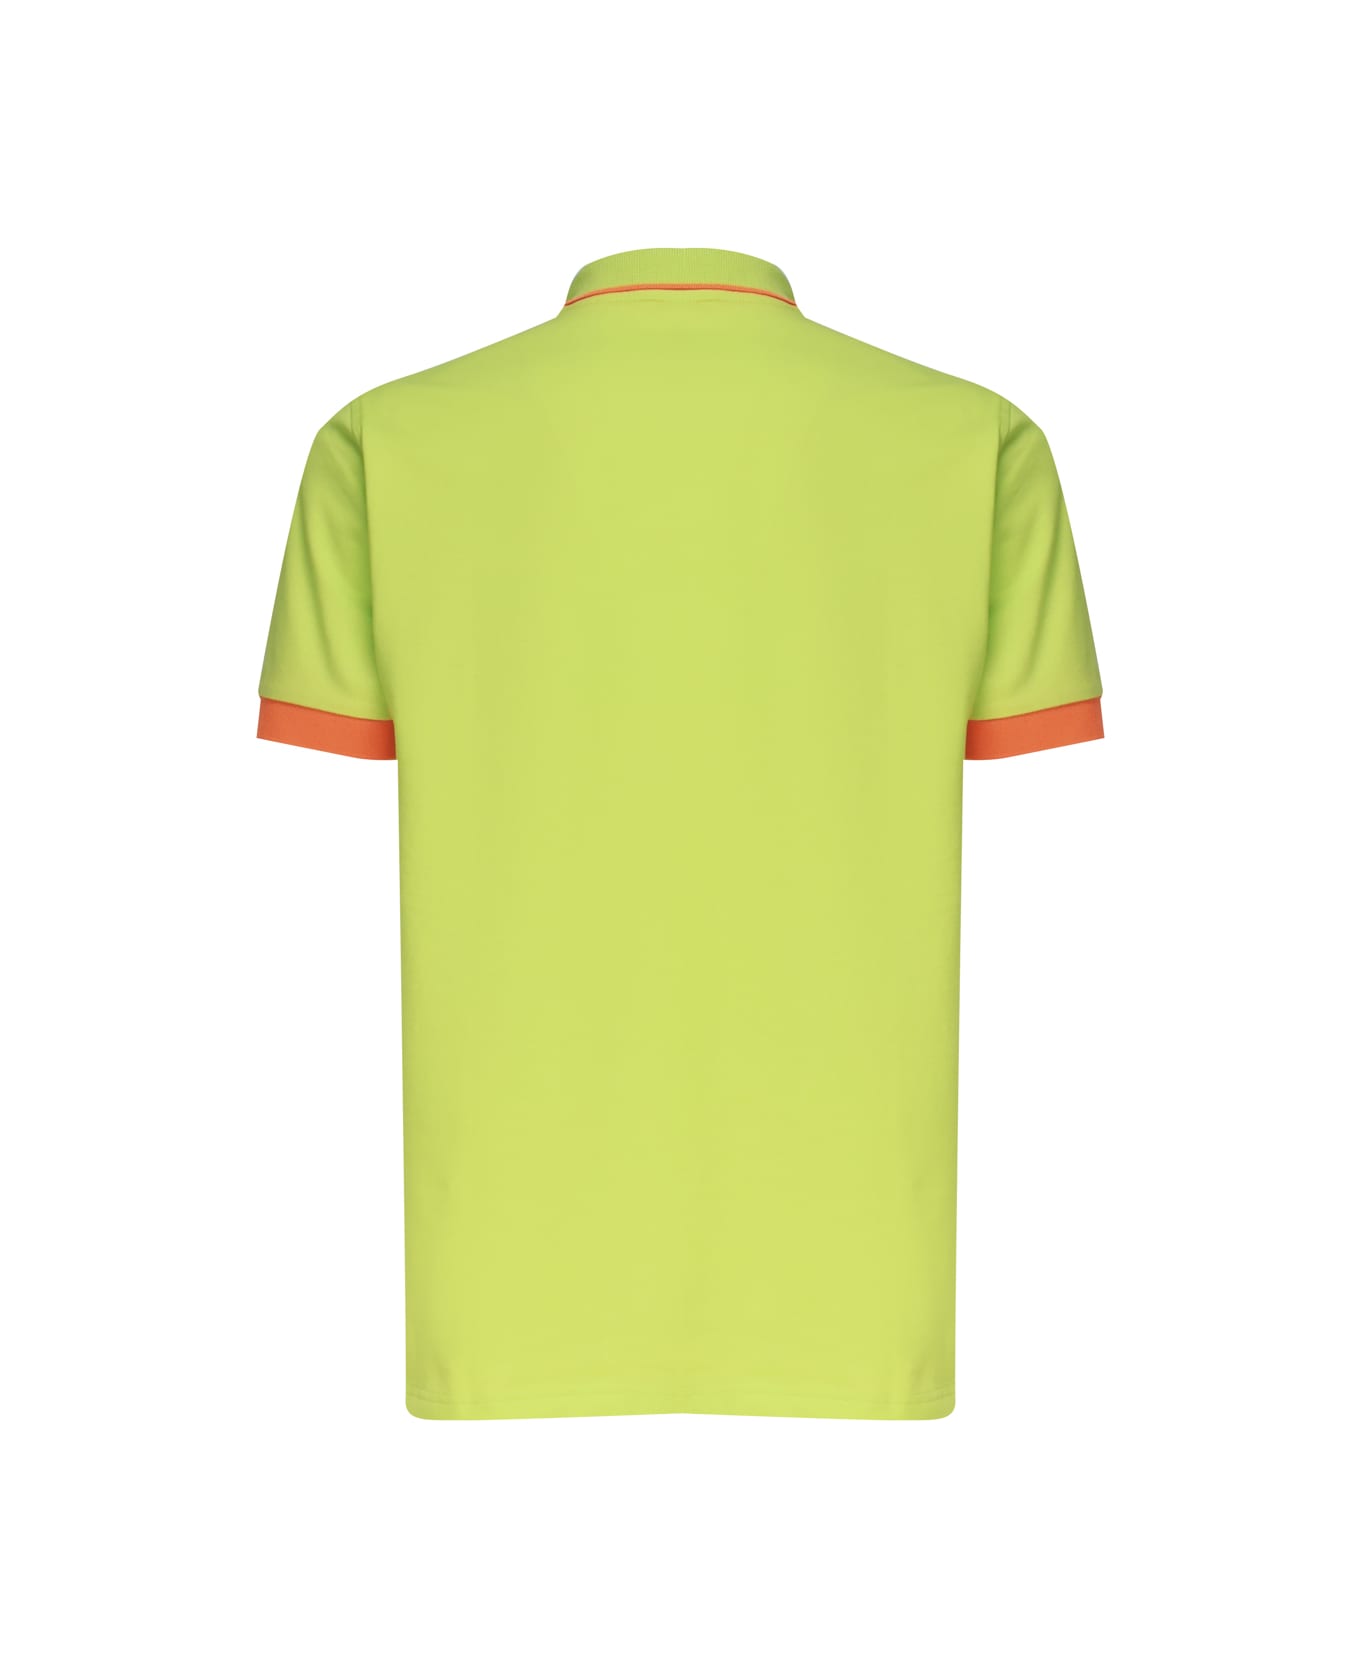 Sun 68 Polo T-shirt In Cotton - Lime